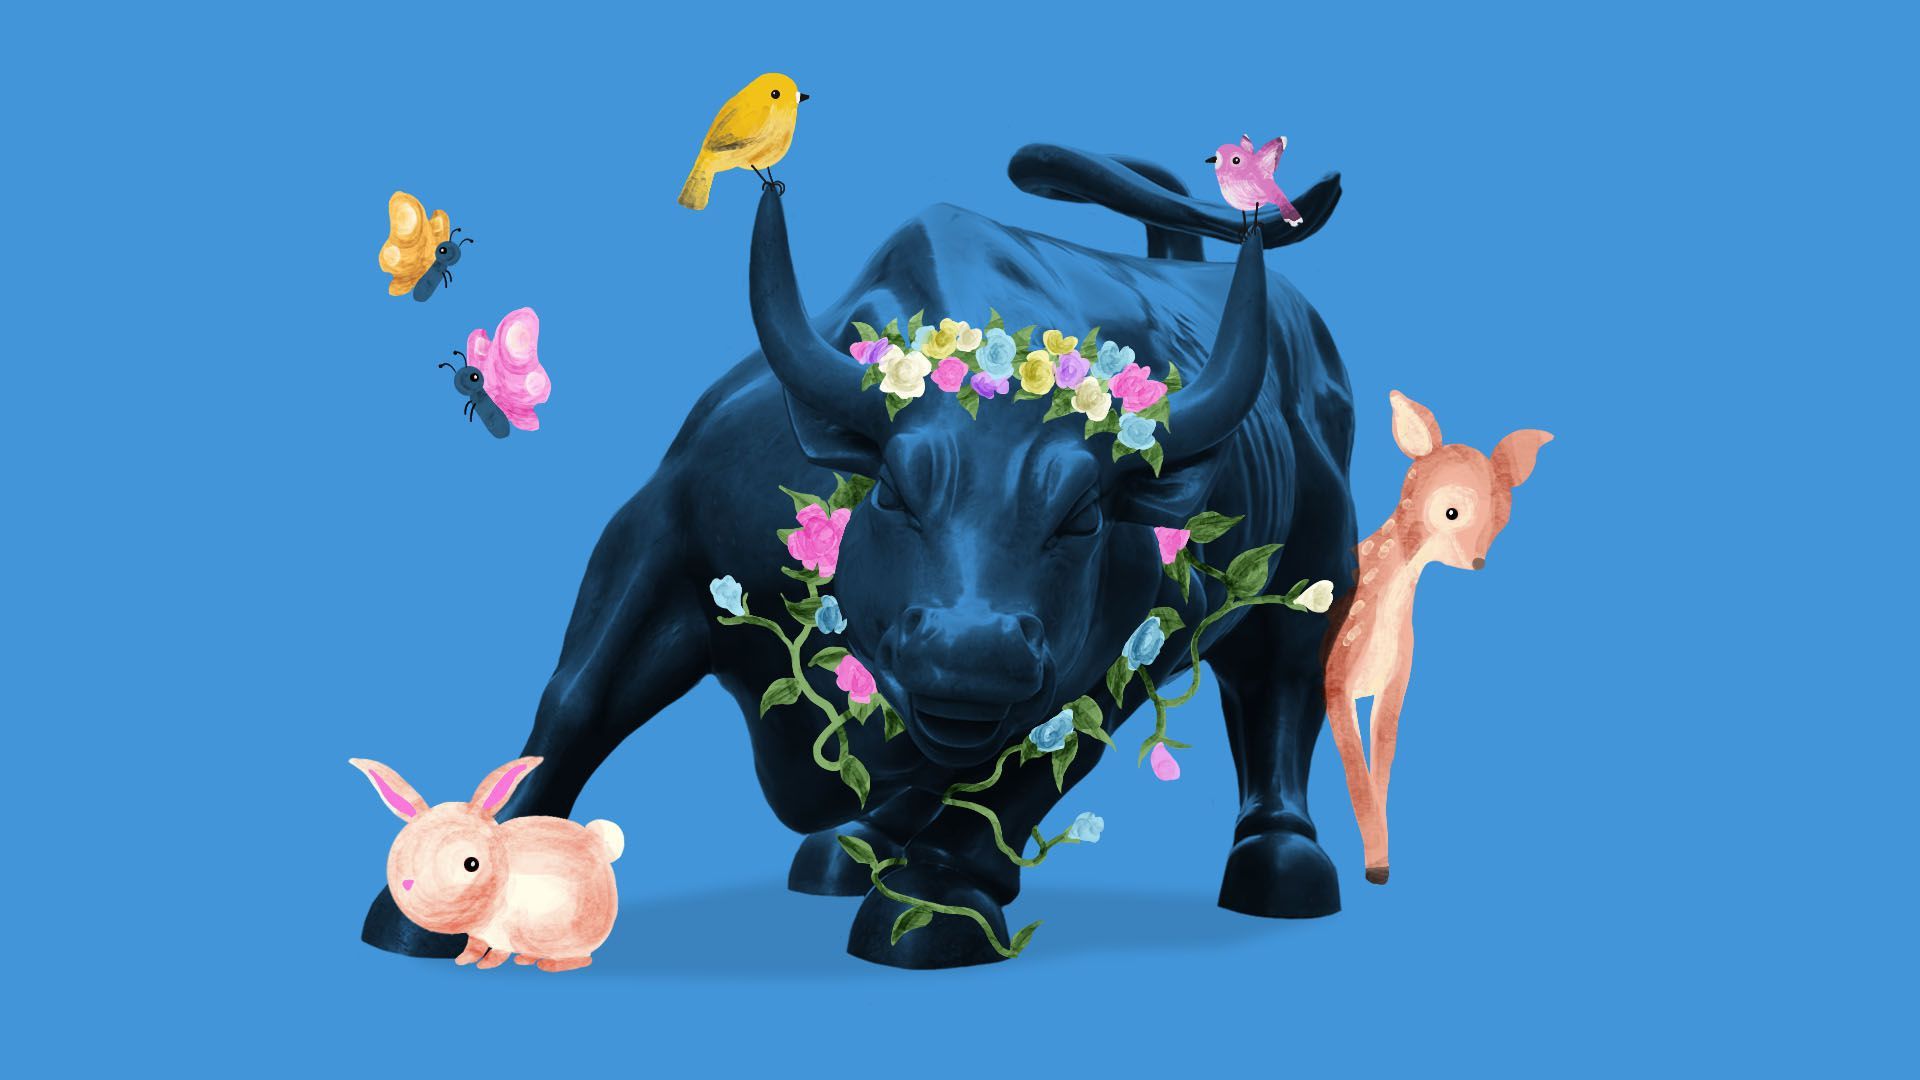 The New York Stock exchange bull with flowers and bunnies and deer around it